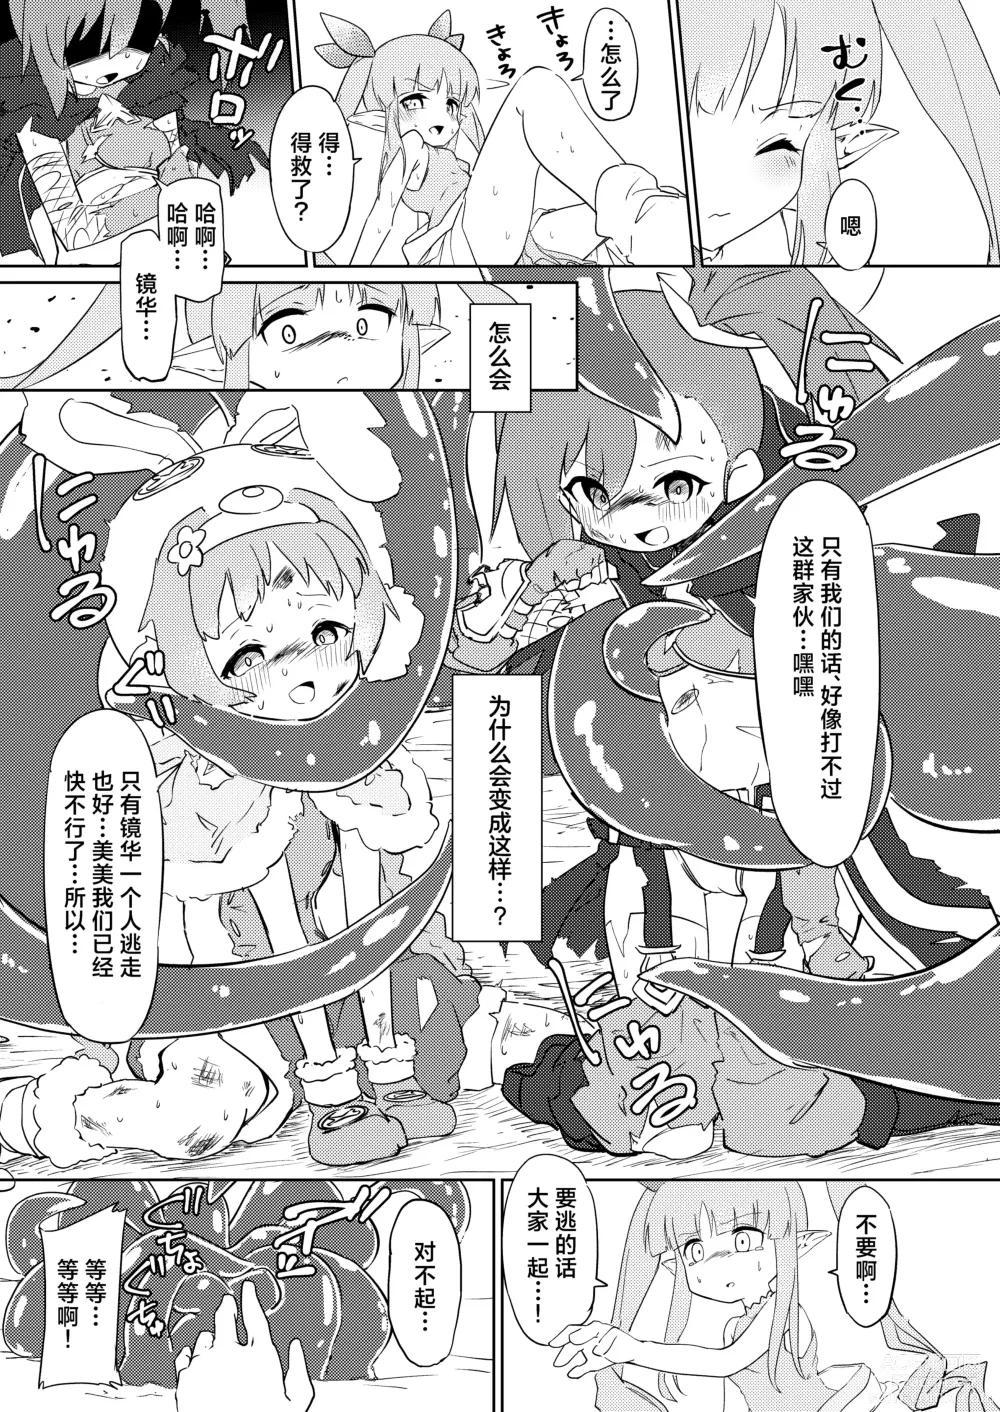 Page 8 of doujinshi Tentacle Defeat Little Lyrical Edition Prototype